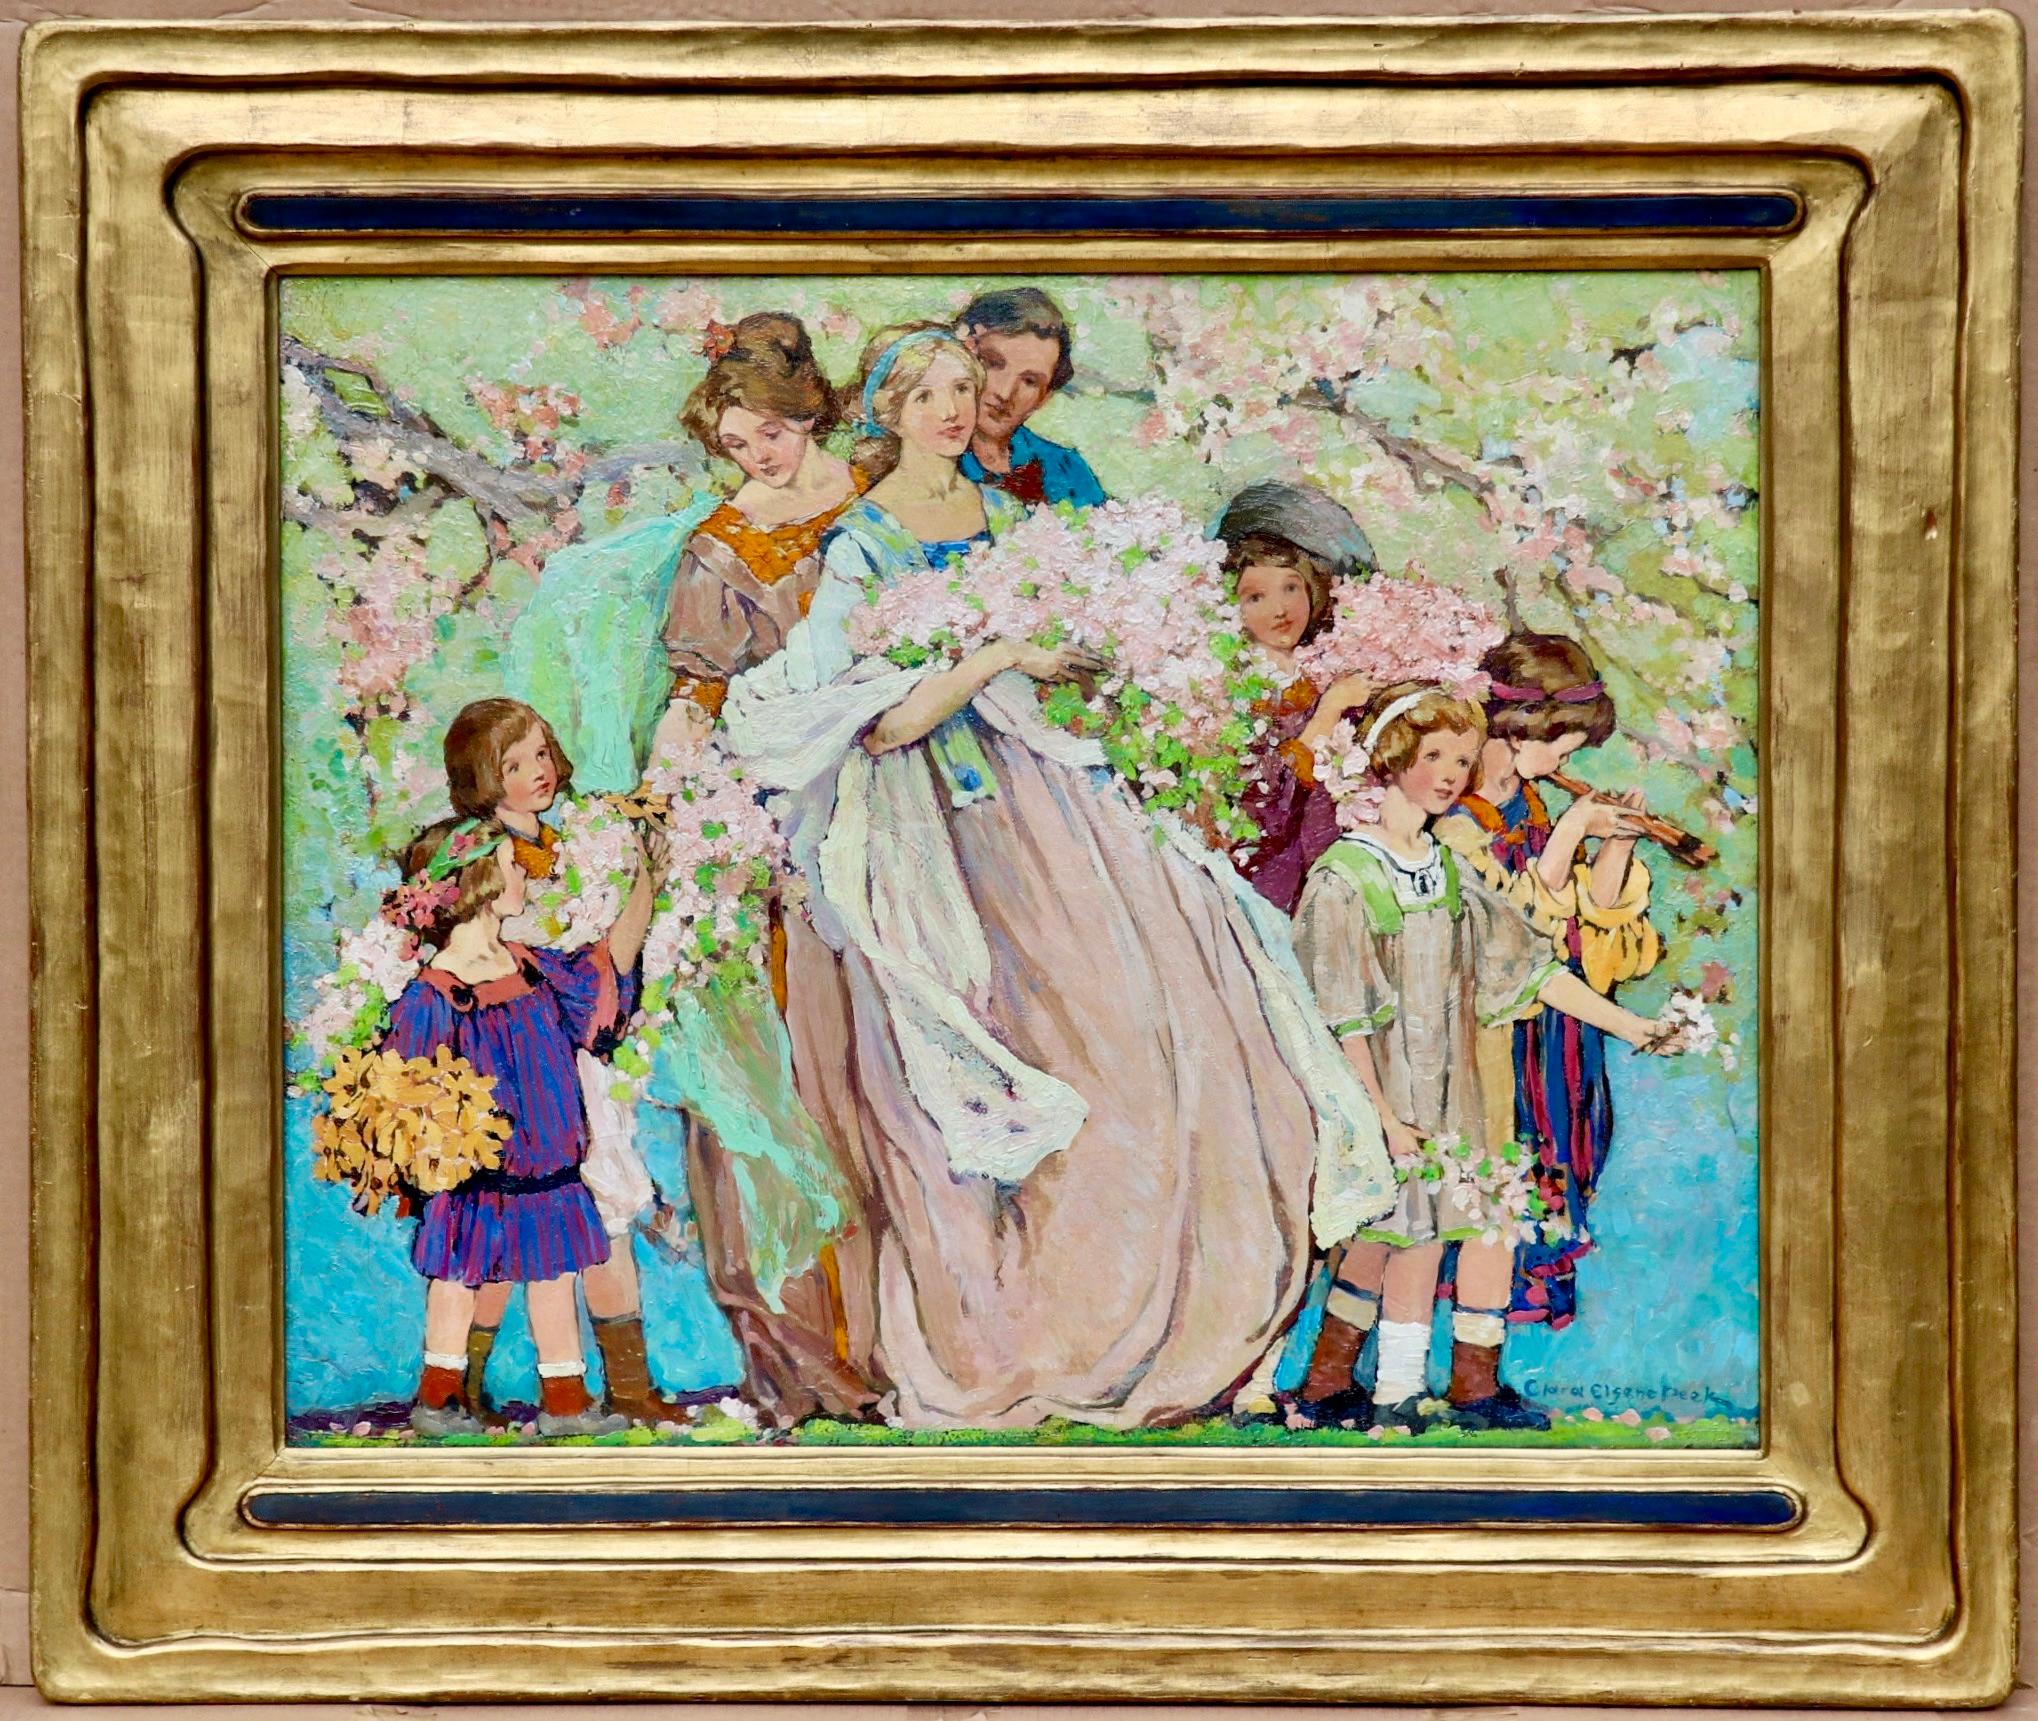 Figures with Floral Garlands - Painting by Clara Peck